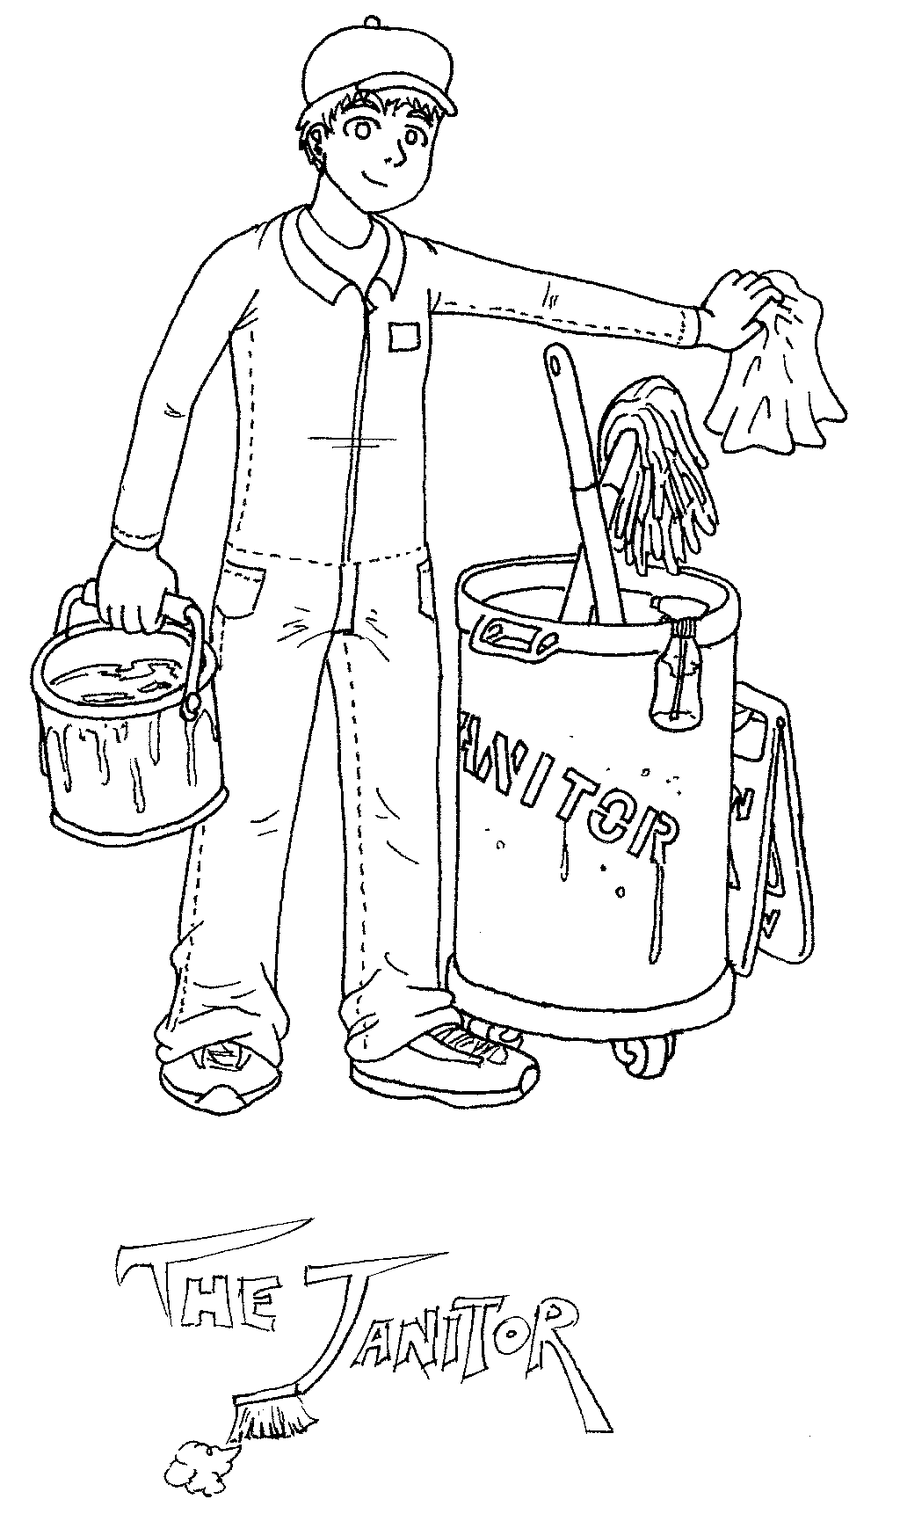 janitor - Clip Art Gallery